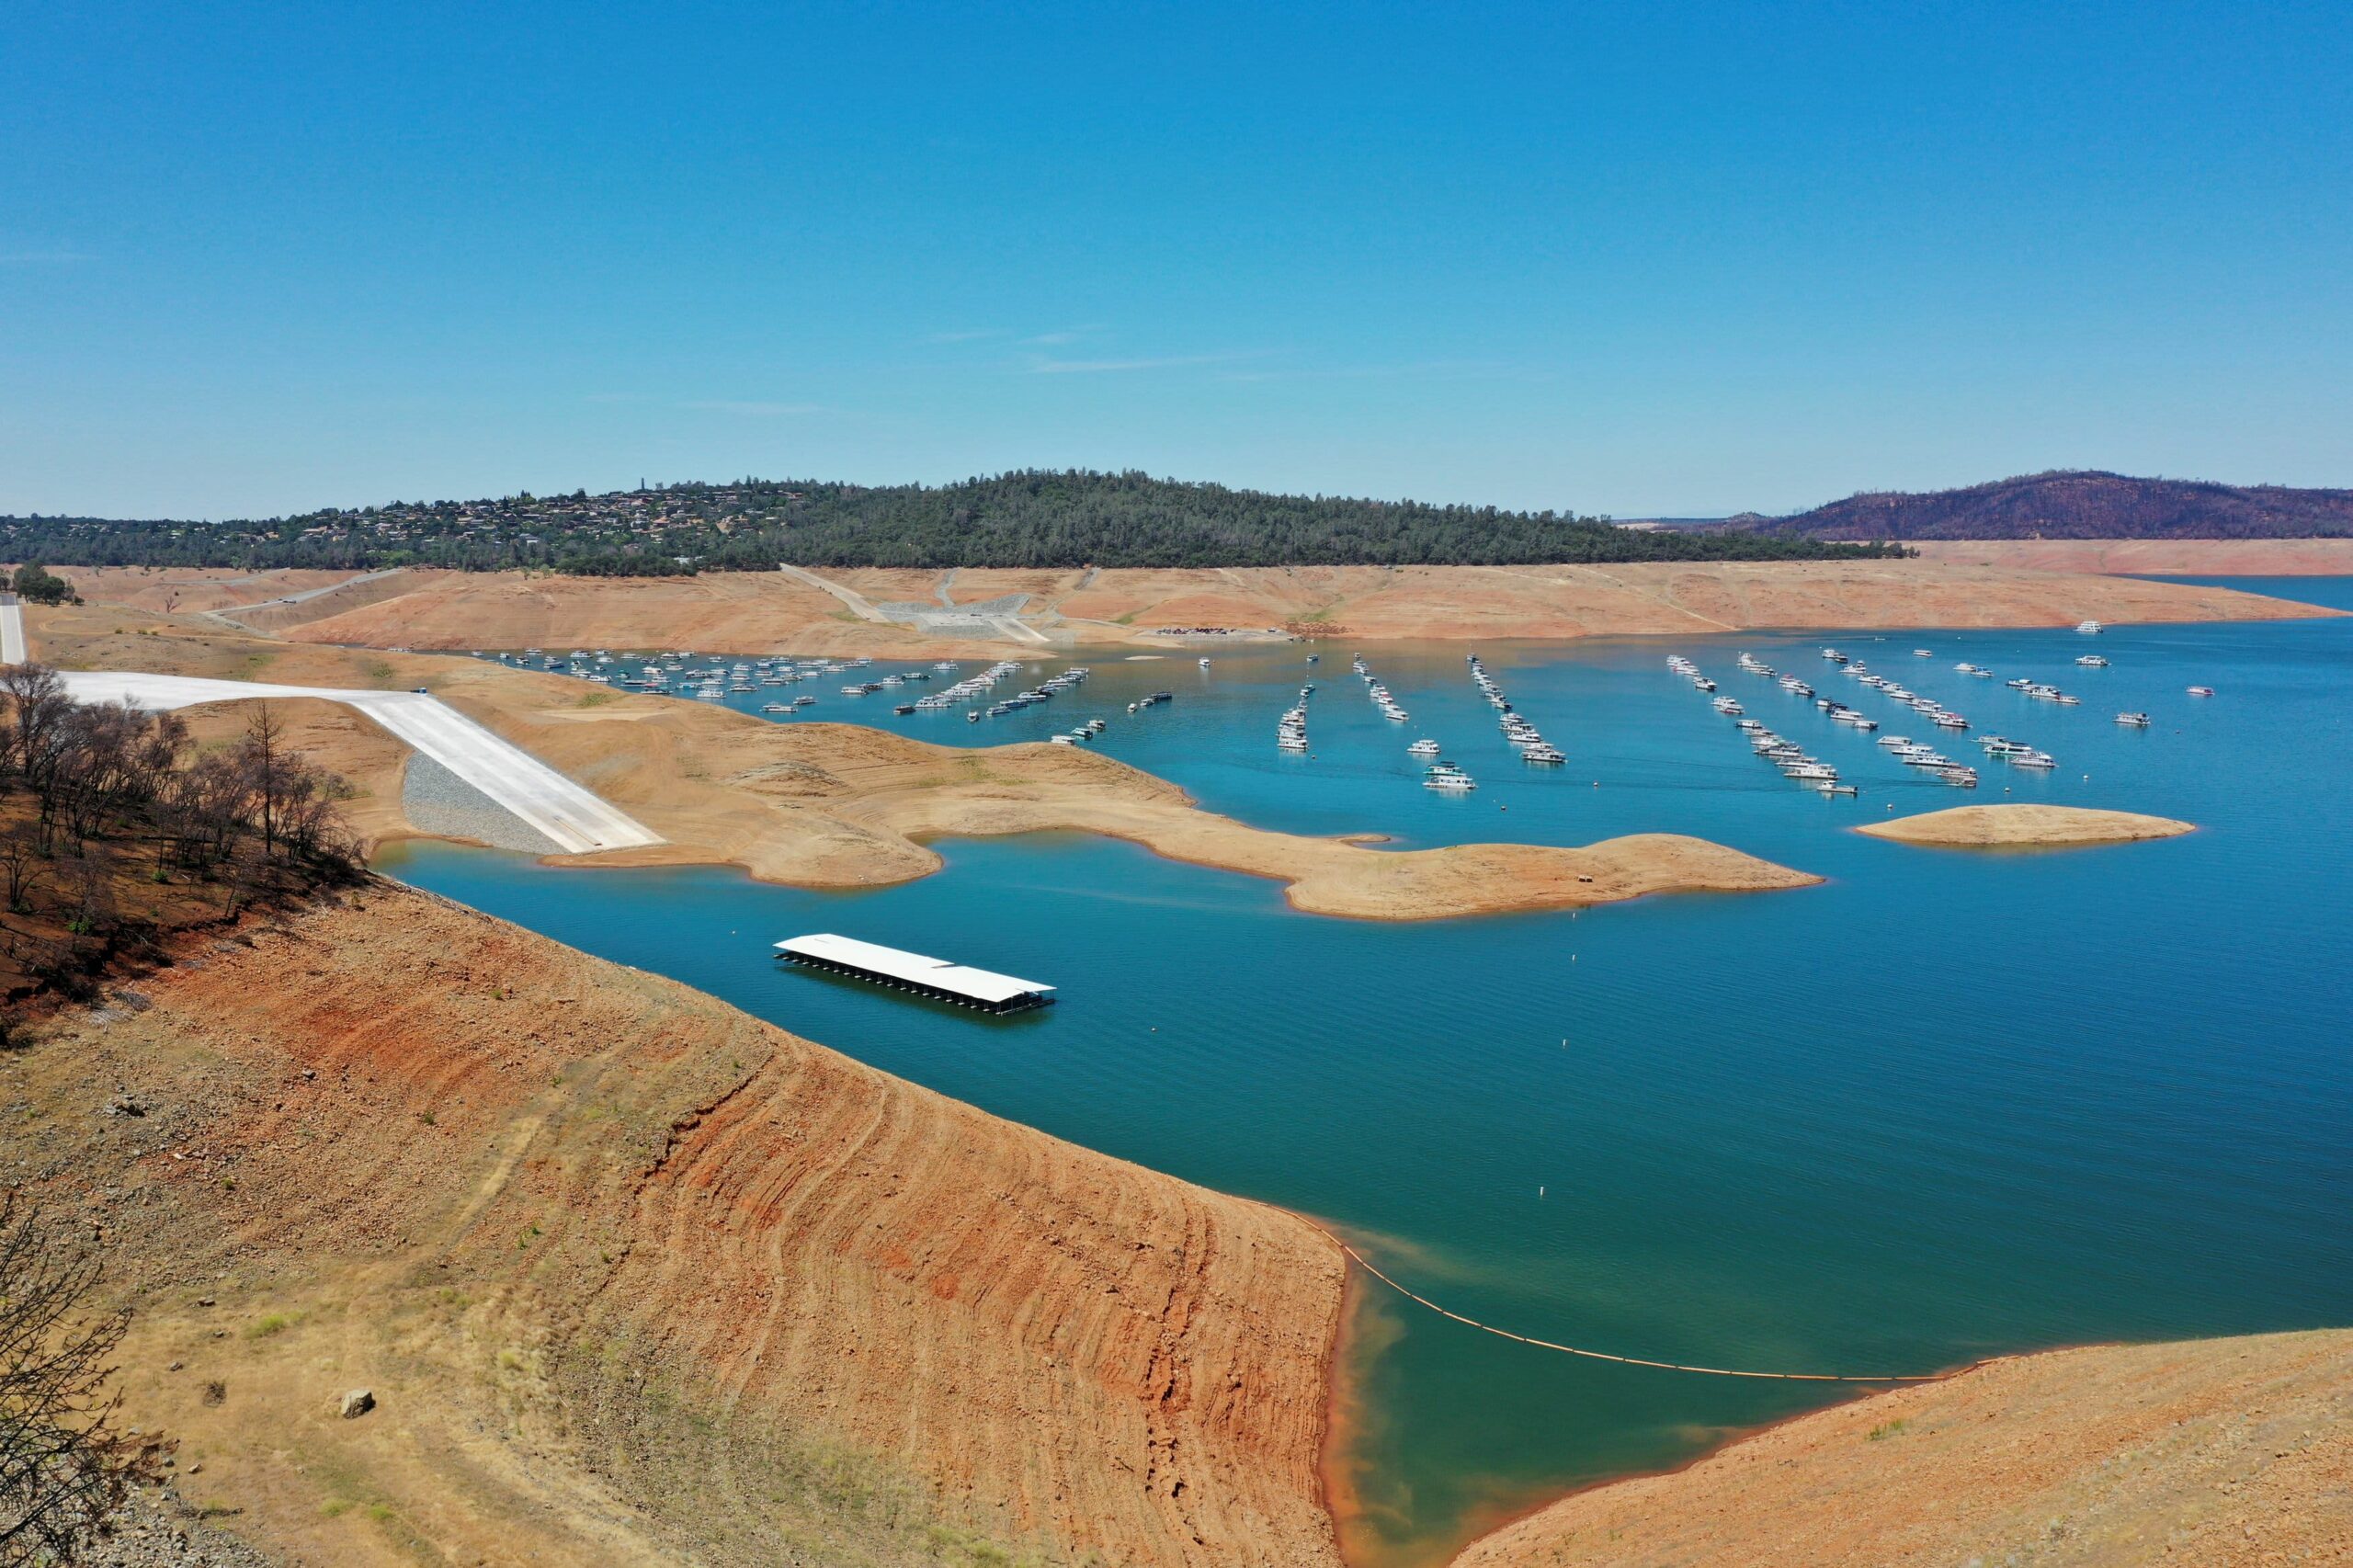 California shuts down main hydroelectric plant amid extreme drought